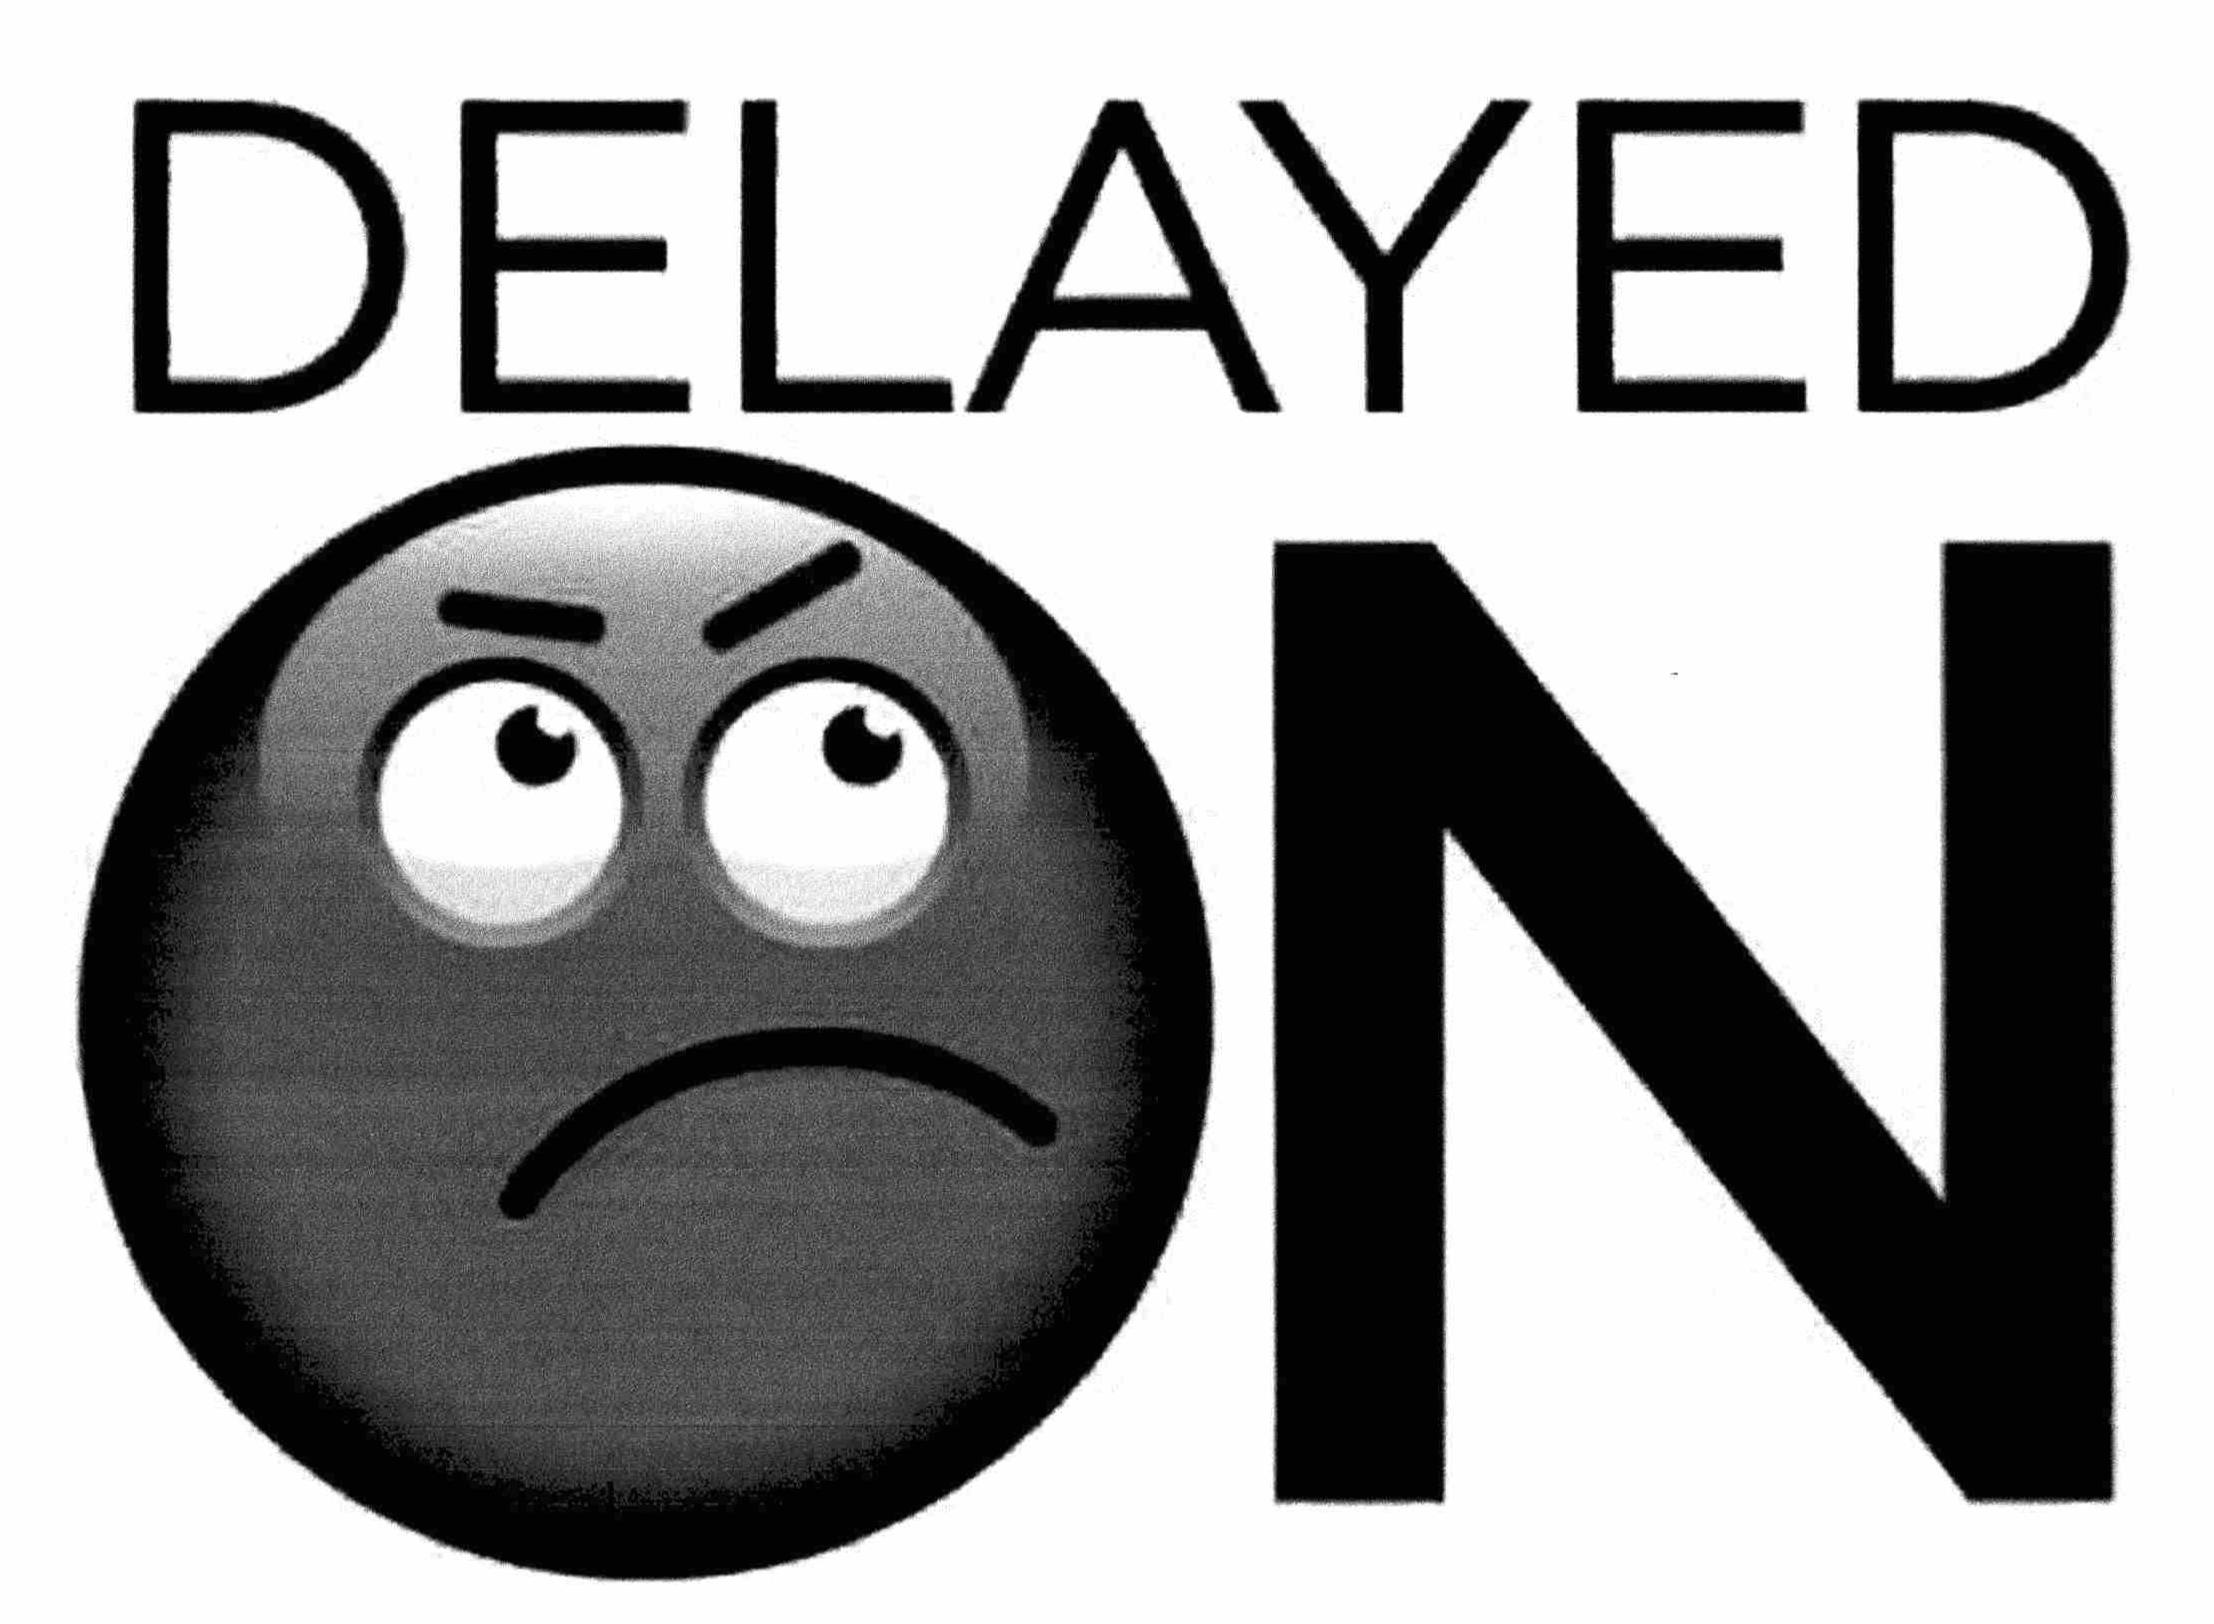  DELAYED ON